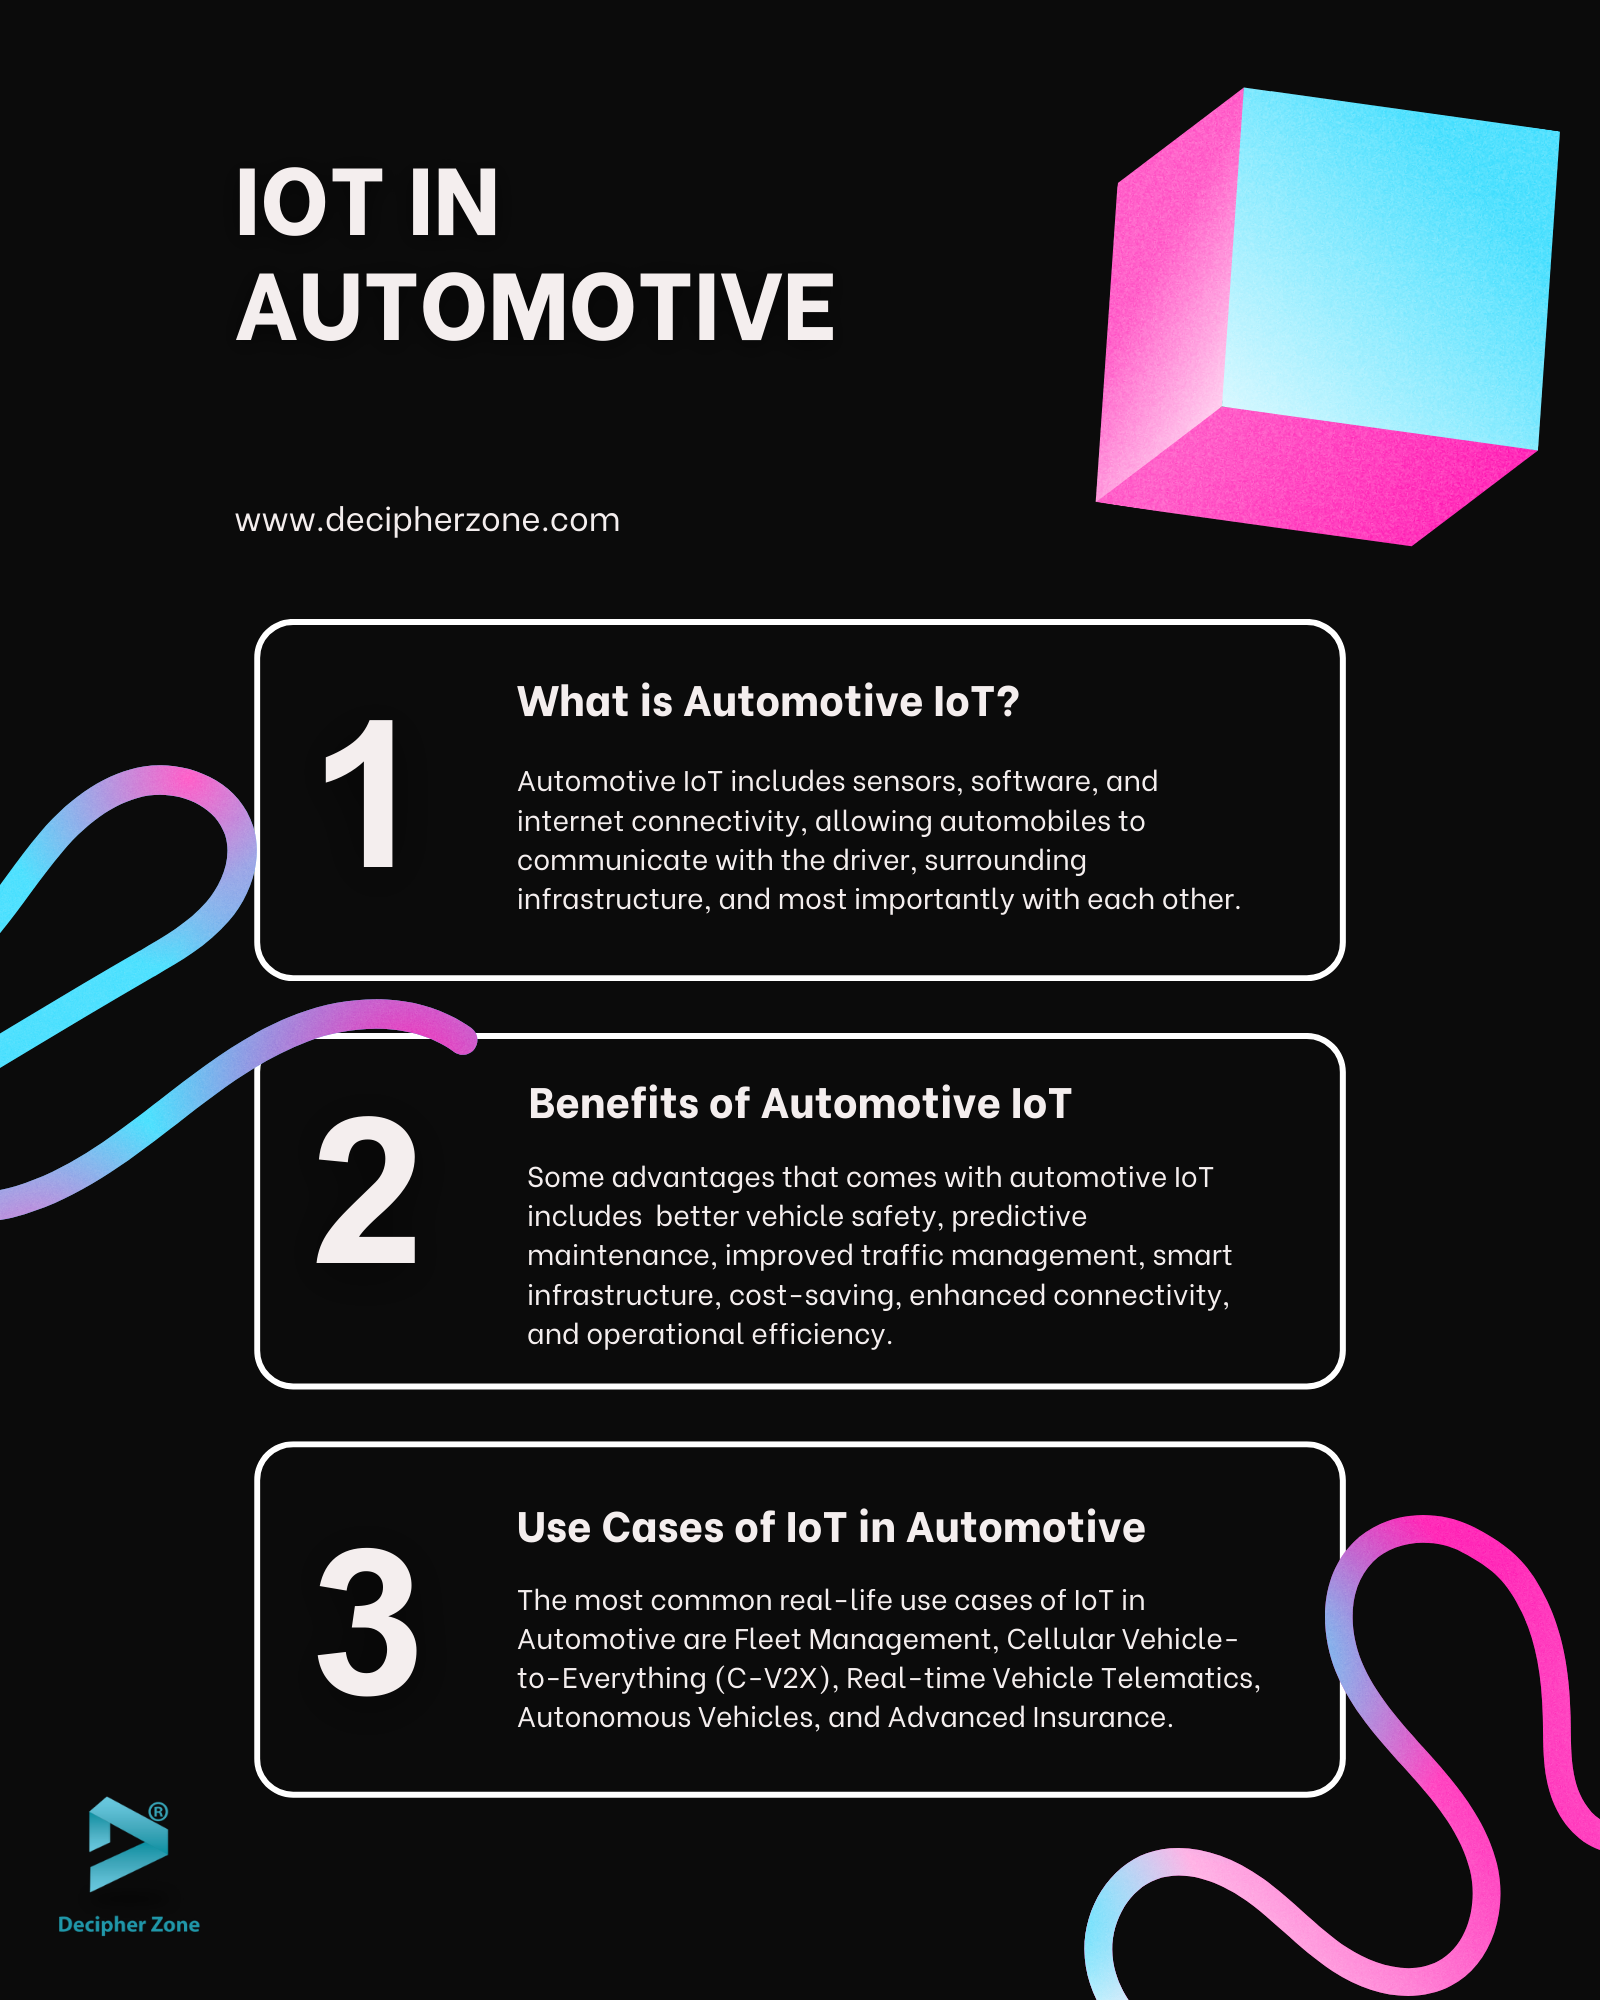 IoT in Automotive: Use Cases, Benefits